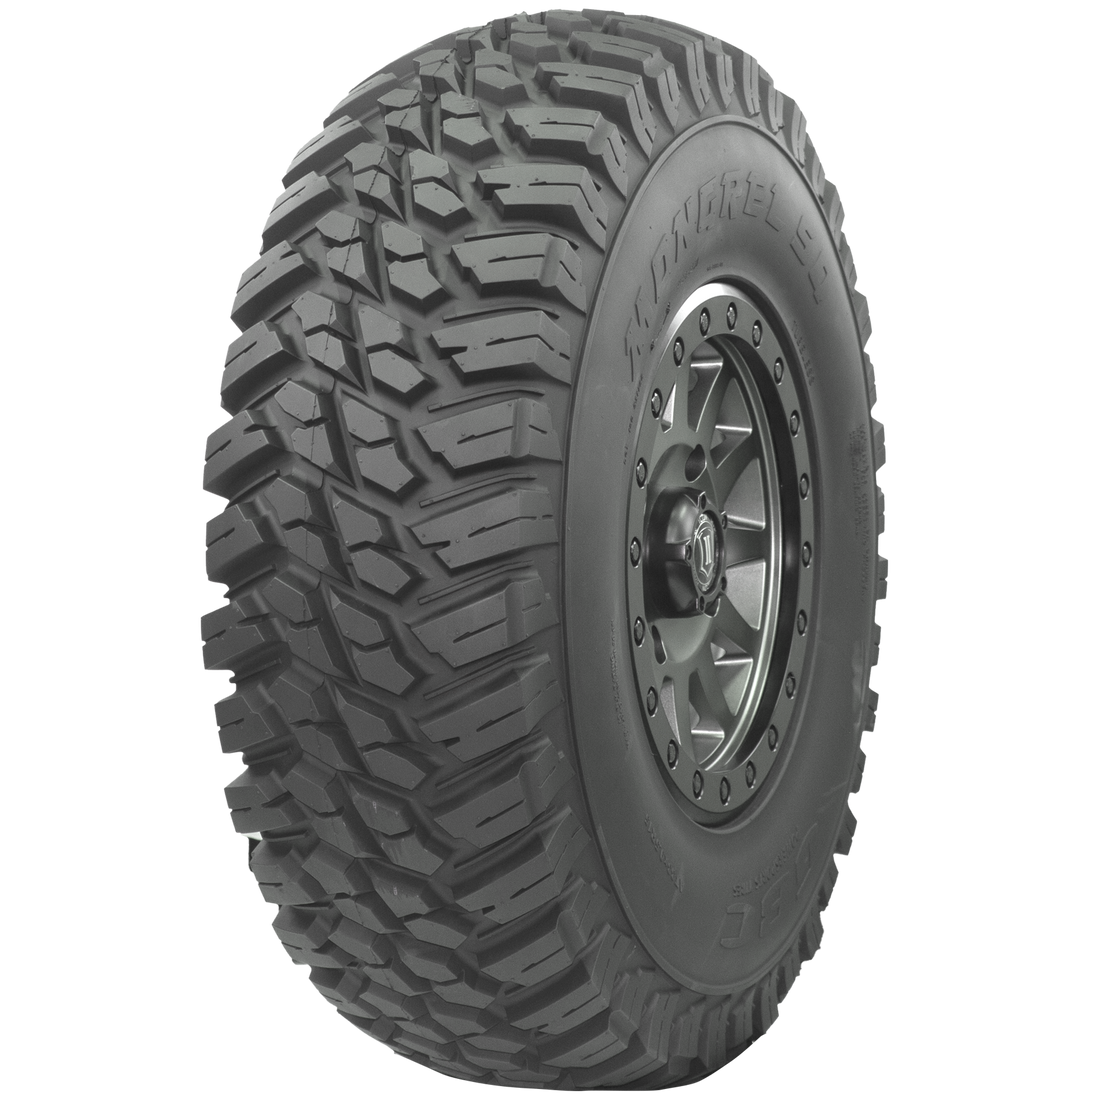 Angle view of Mongrel SQ ATV/UTV tire, demonstrating the tread, partial sidewall, and rim. The image highlights the tire's unique square profile designed for maximizing contact with the road, enhancing stability and control.